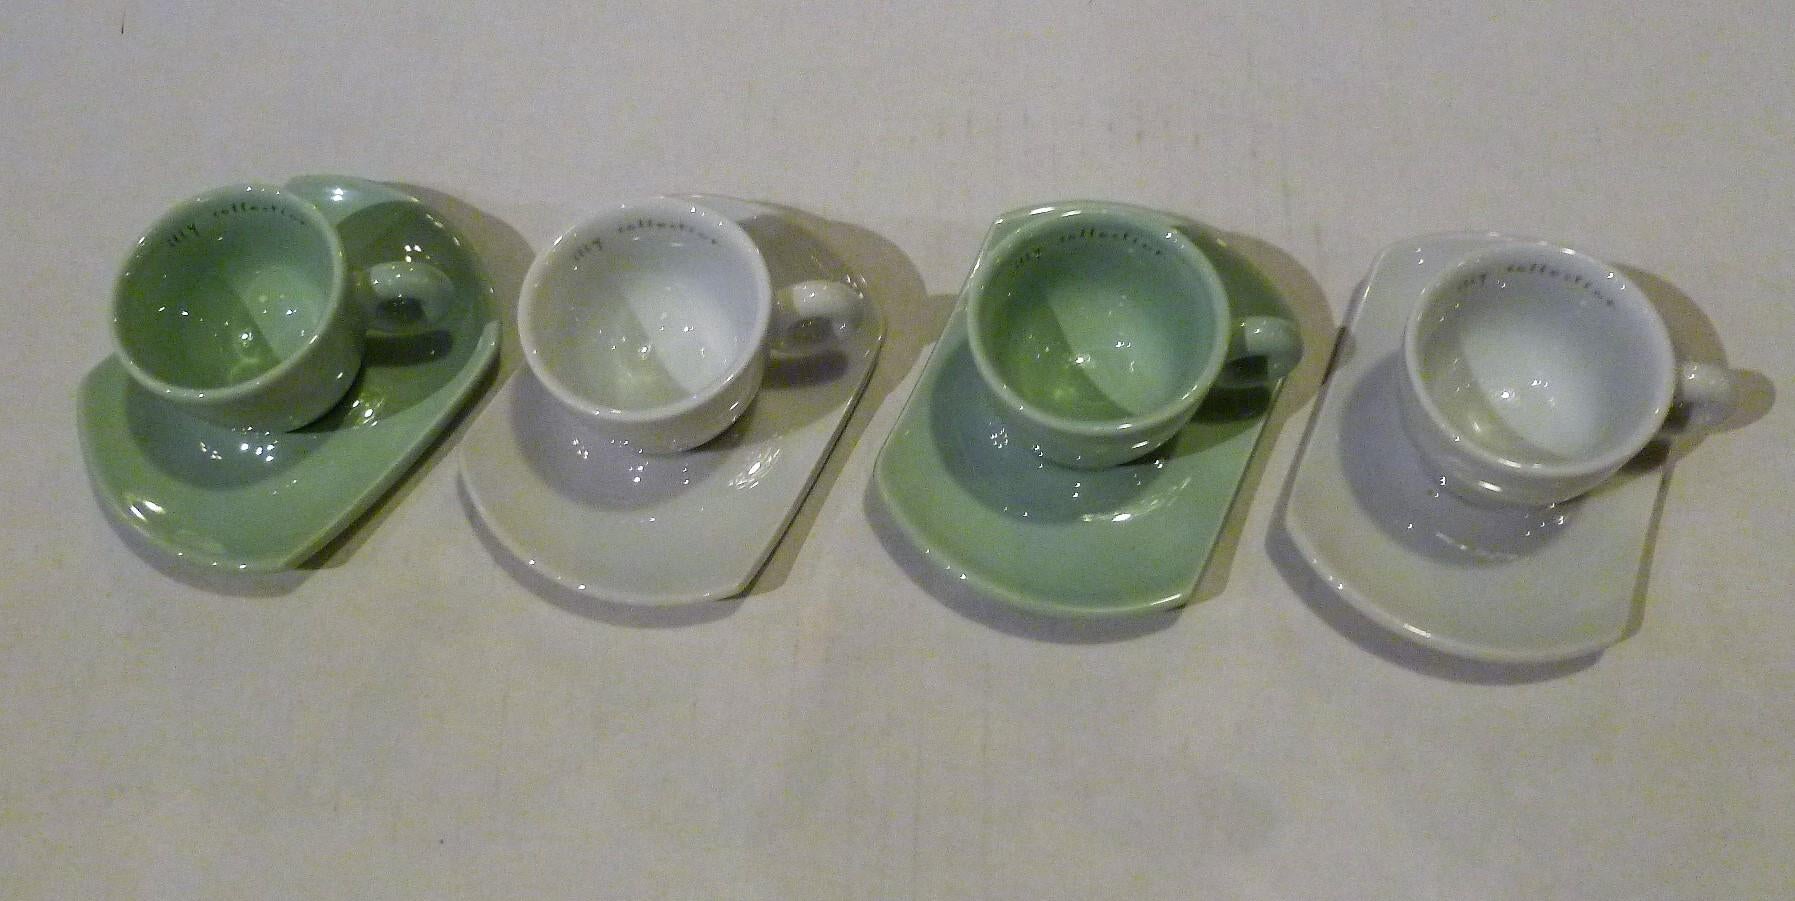 Daniel Buren Illy Collection 2004 Bianco Verde Expresso Cups and Saucers 2